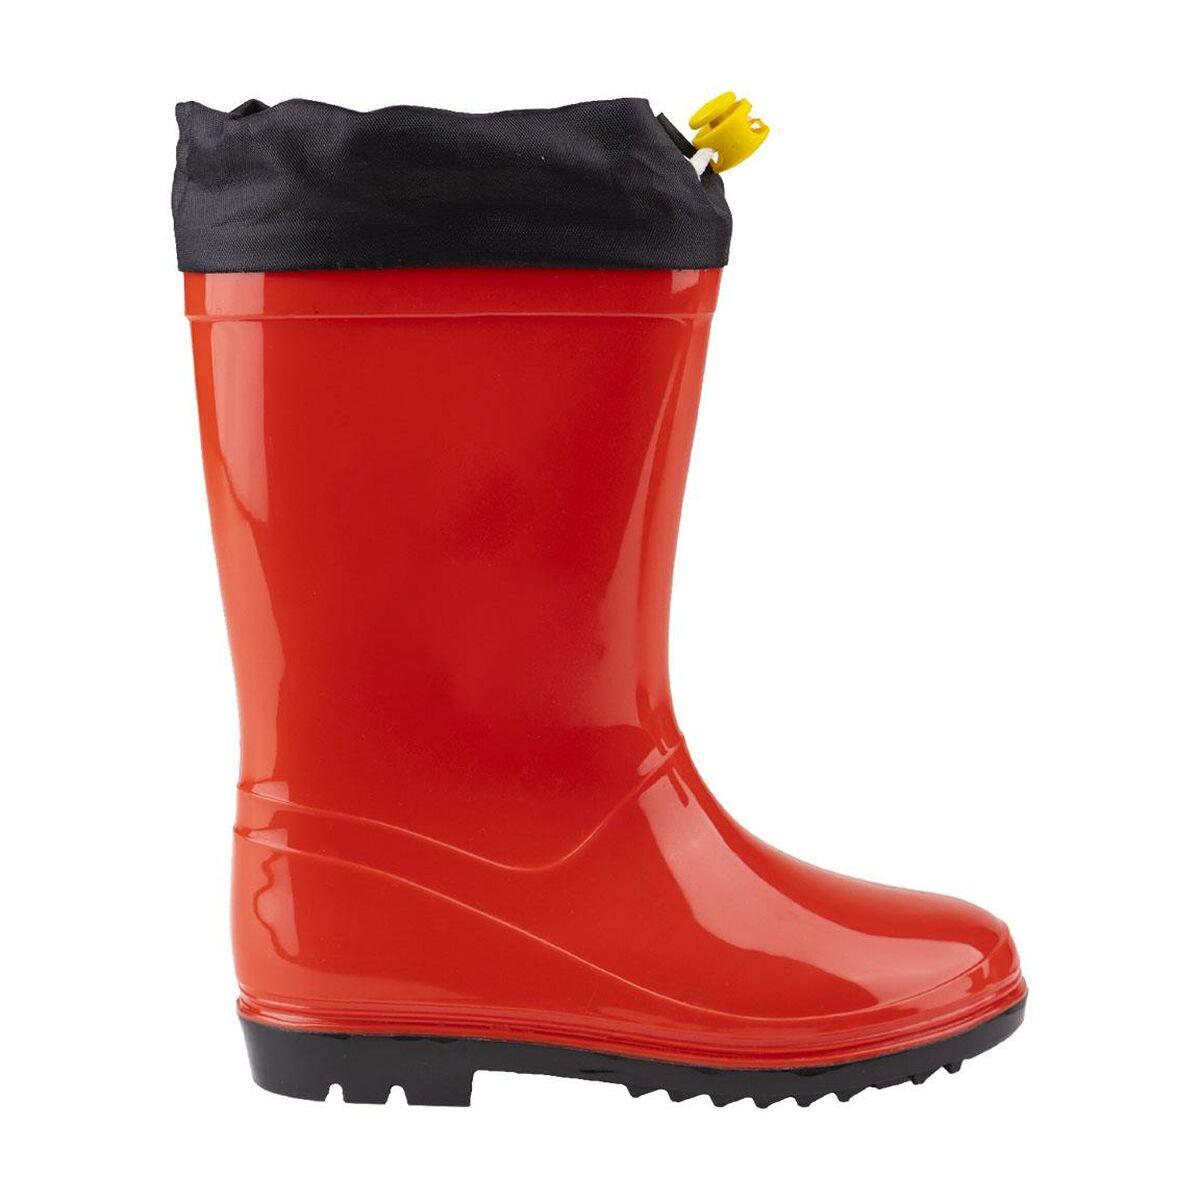 Children's Water Boots Mickey Mouse